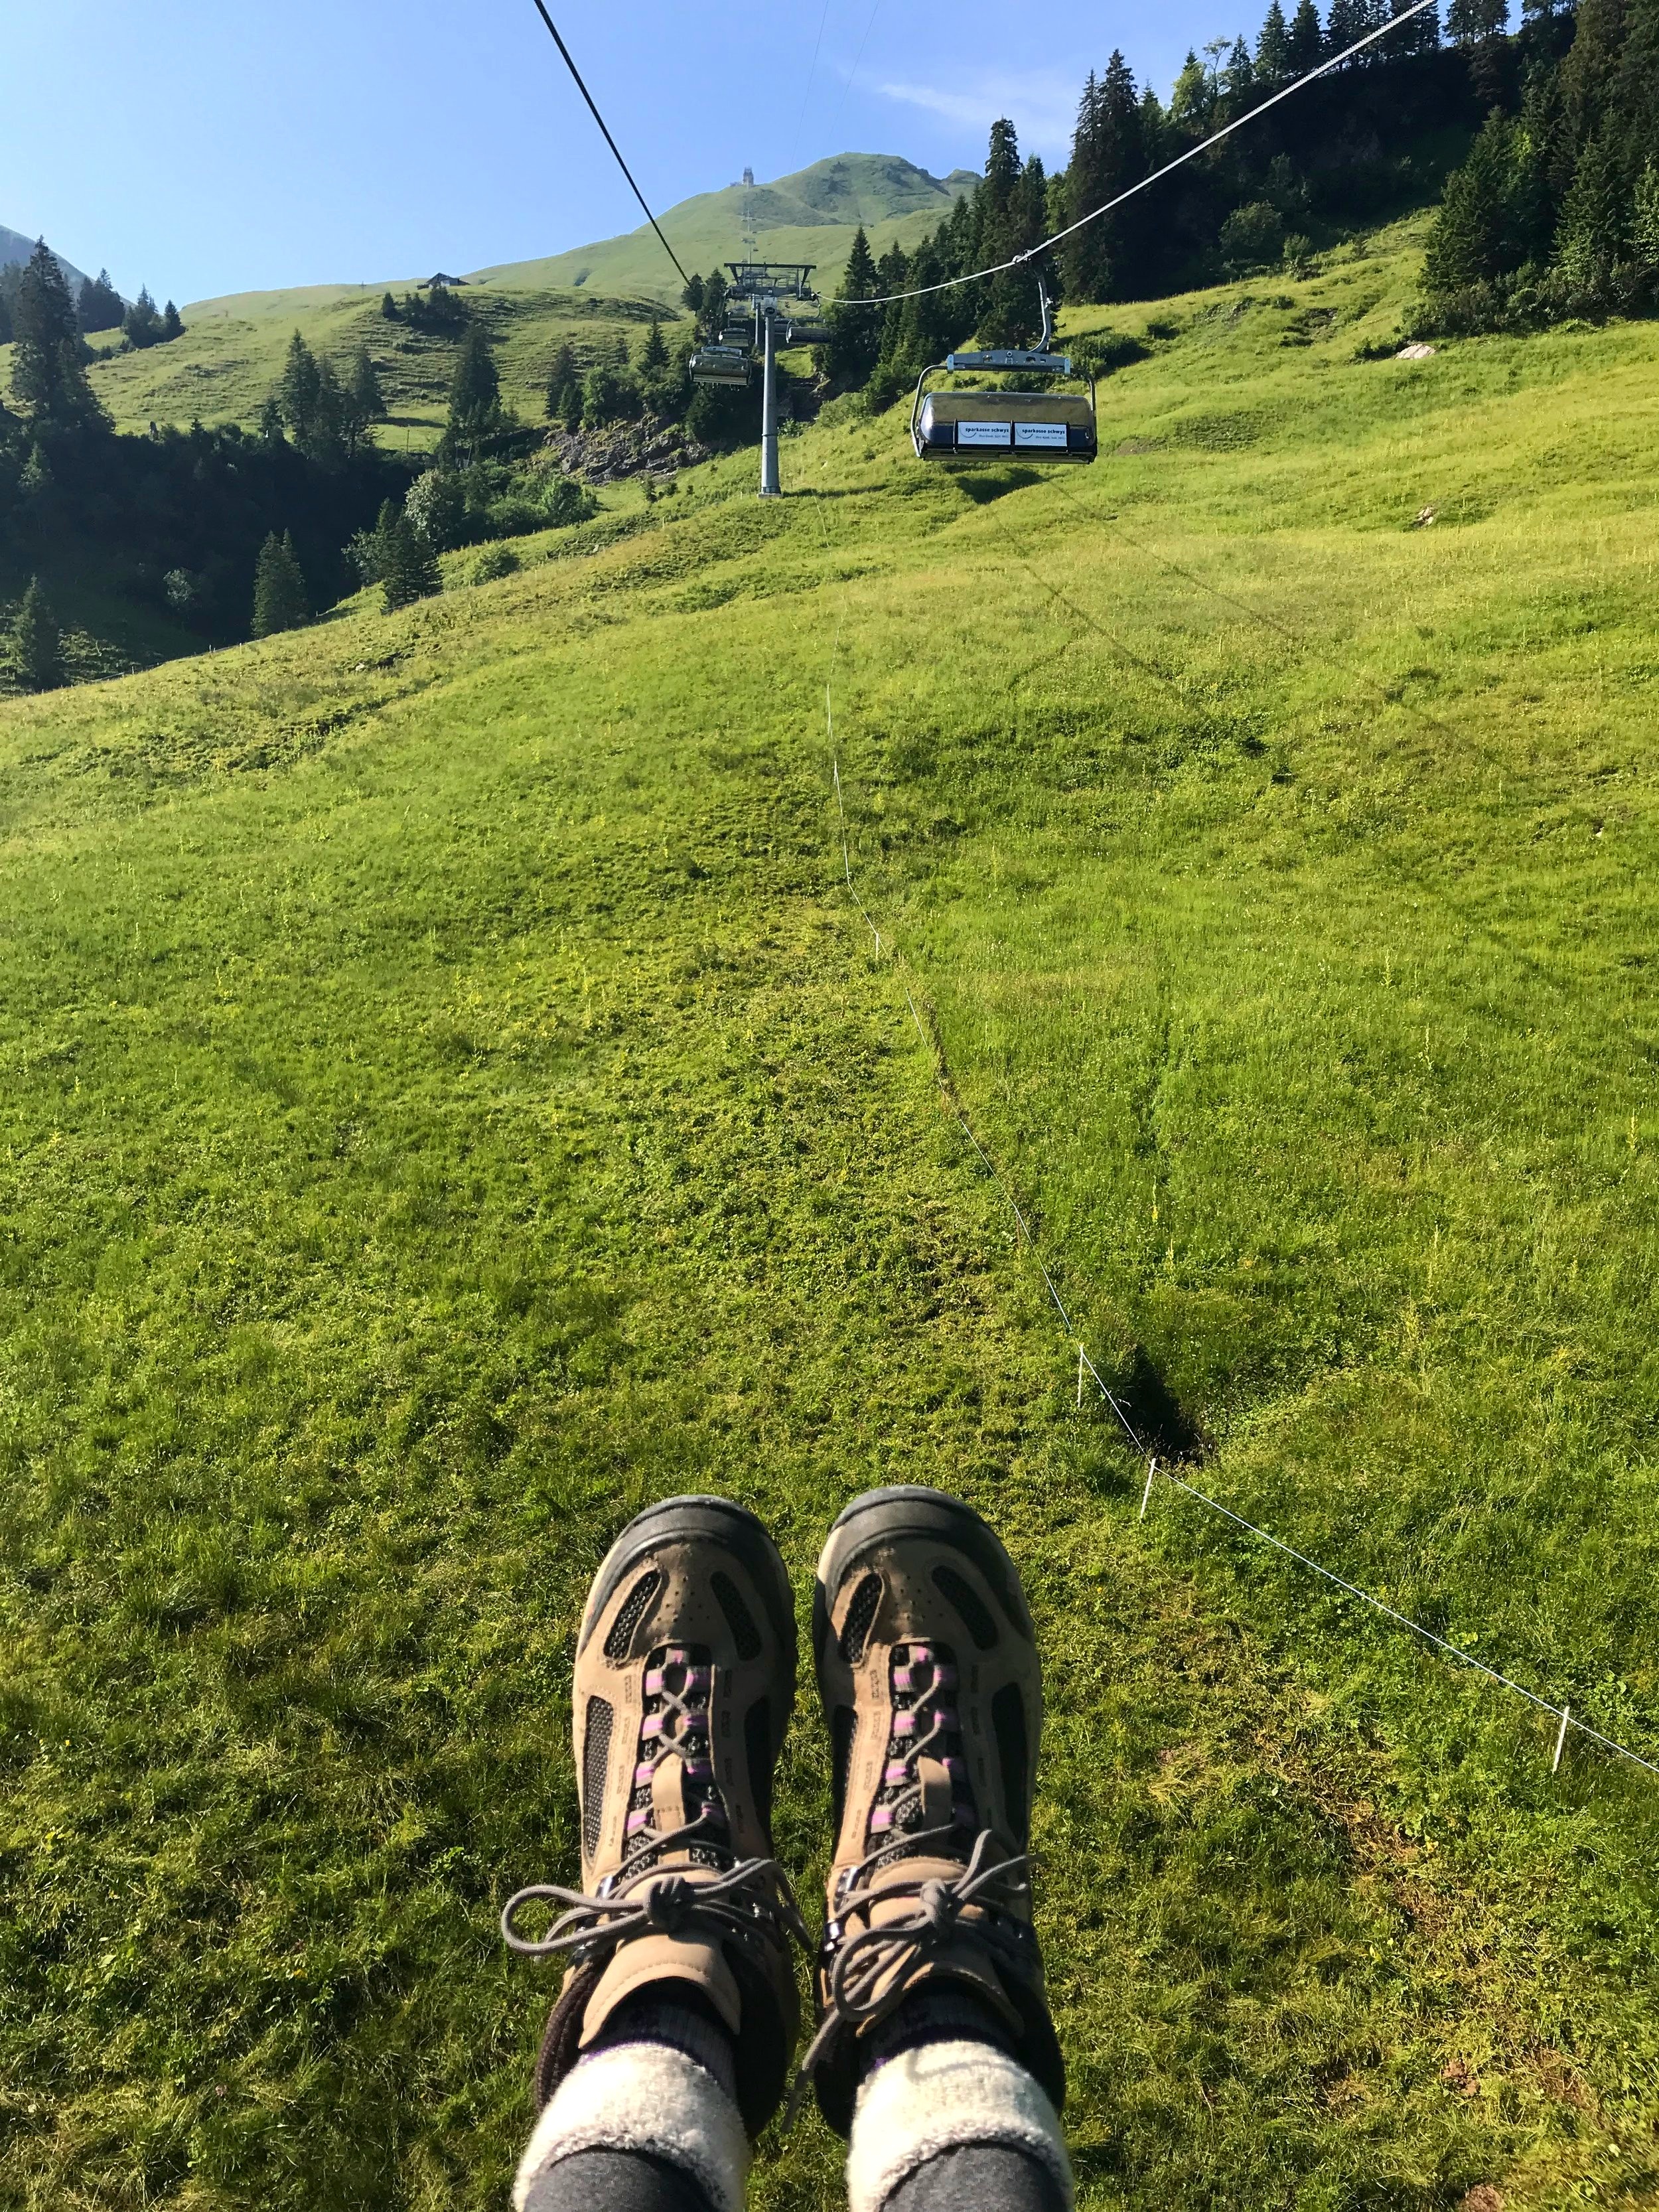 Riding a cable car to the start of the Pizol Five Lakes Hike